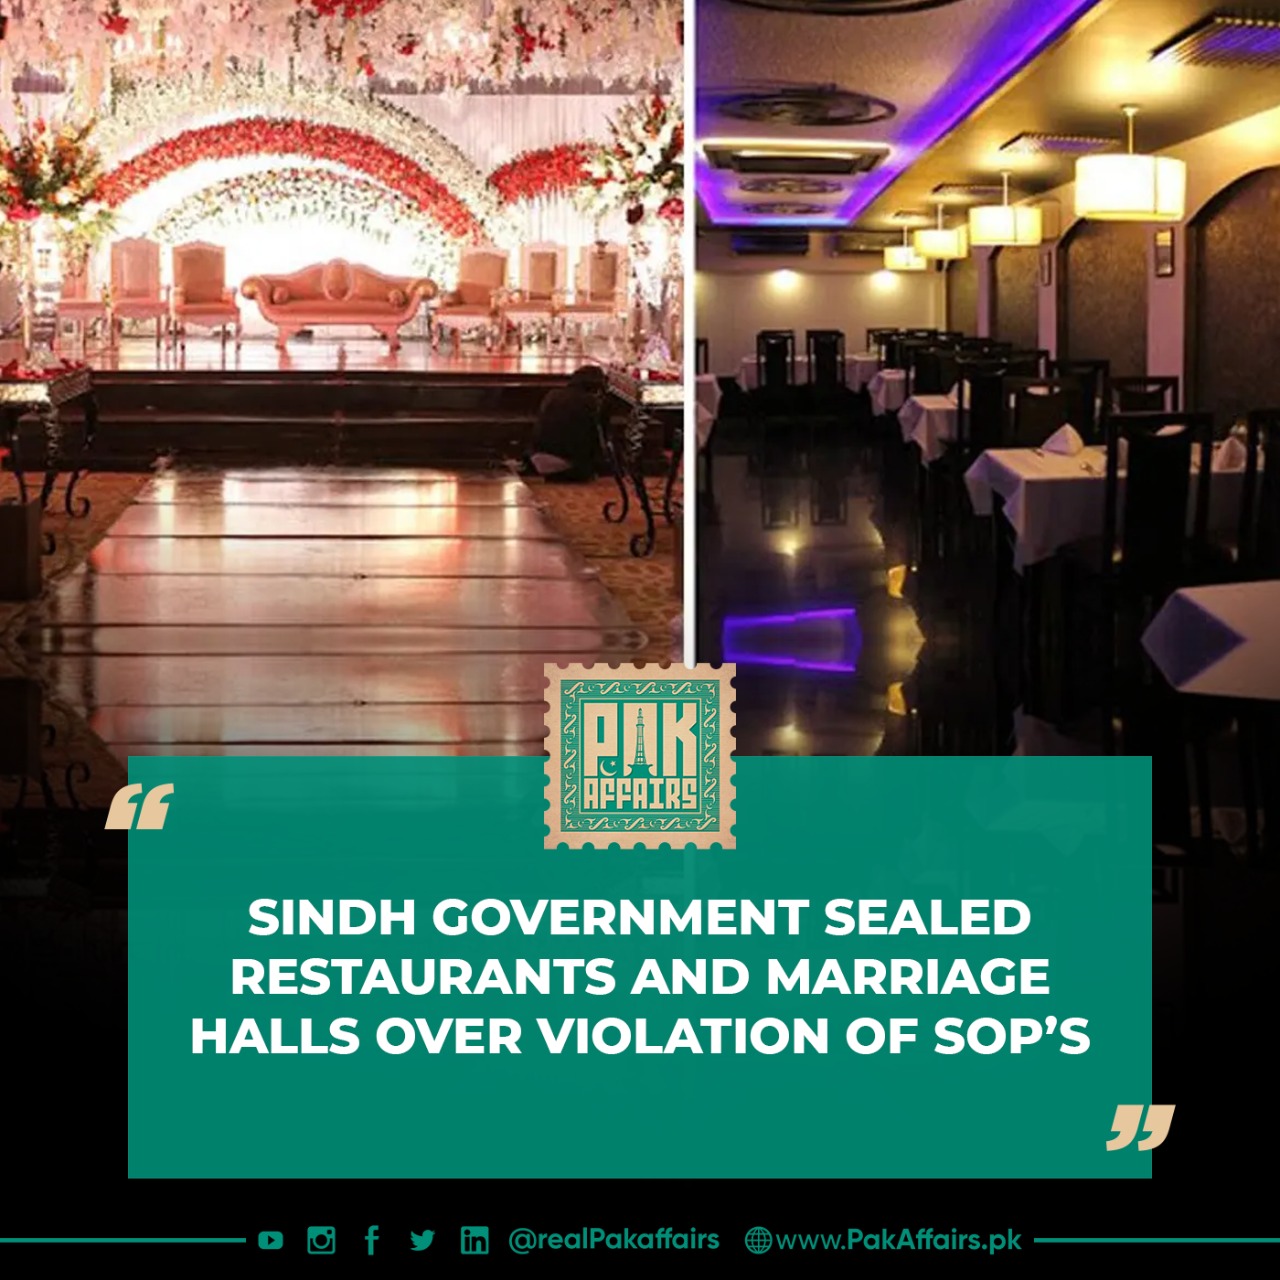 Sindh Government sealed restaurants and marriage halls over violation of SOPs: